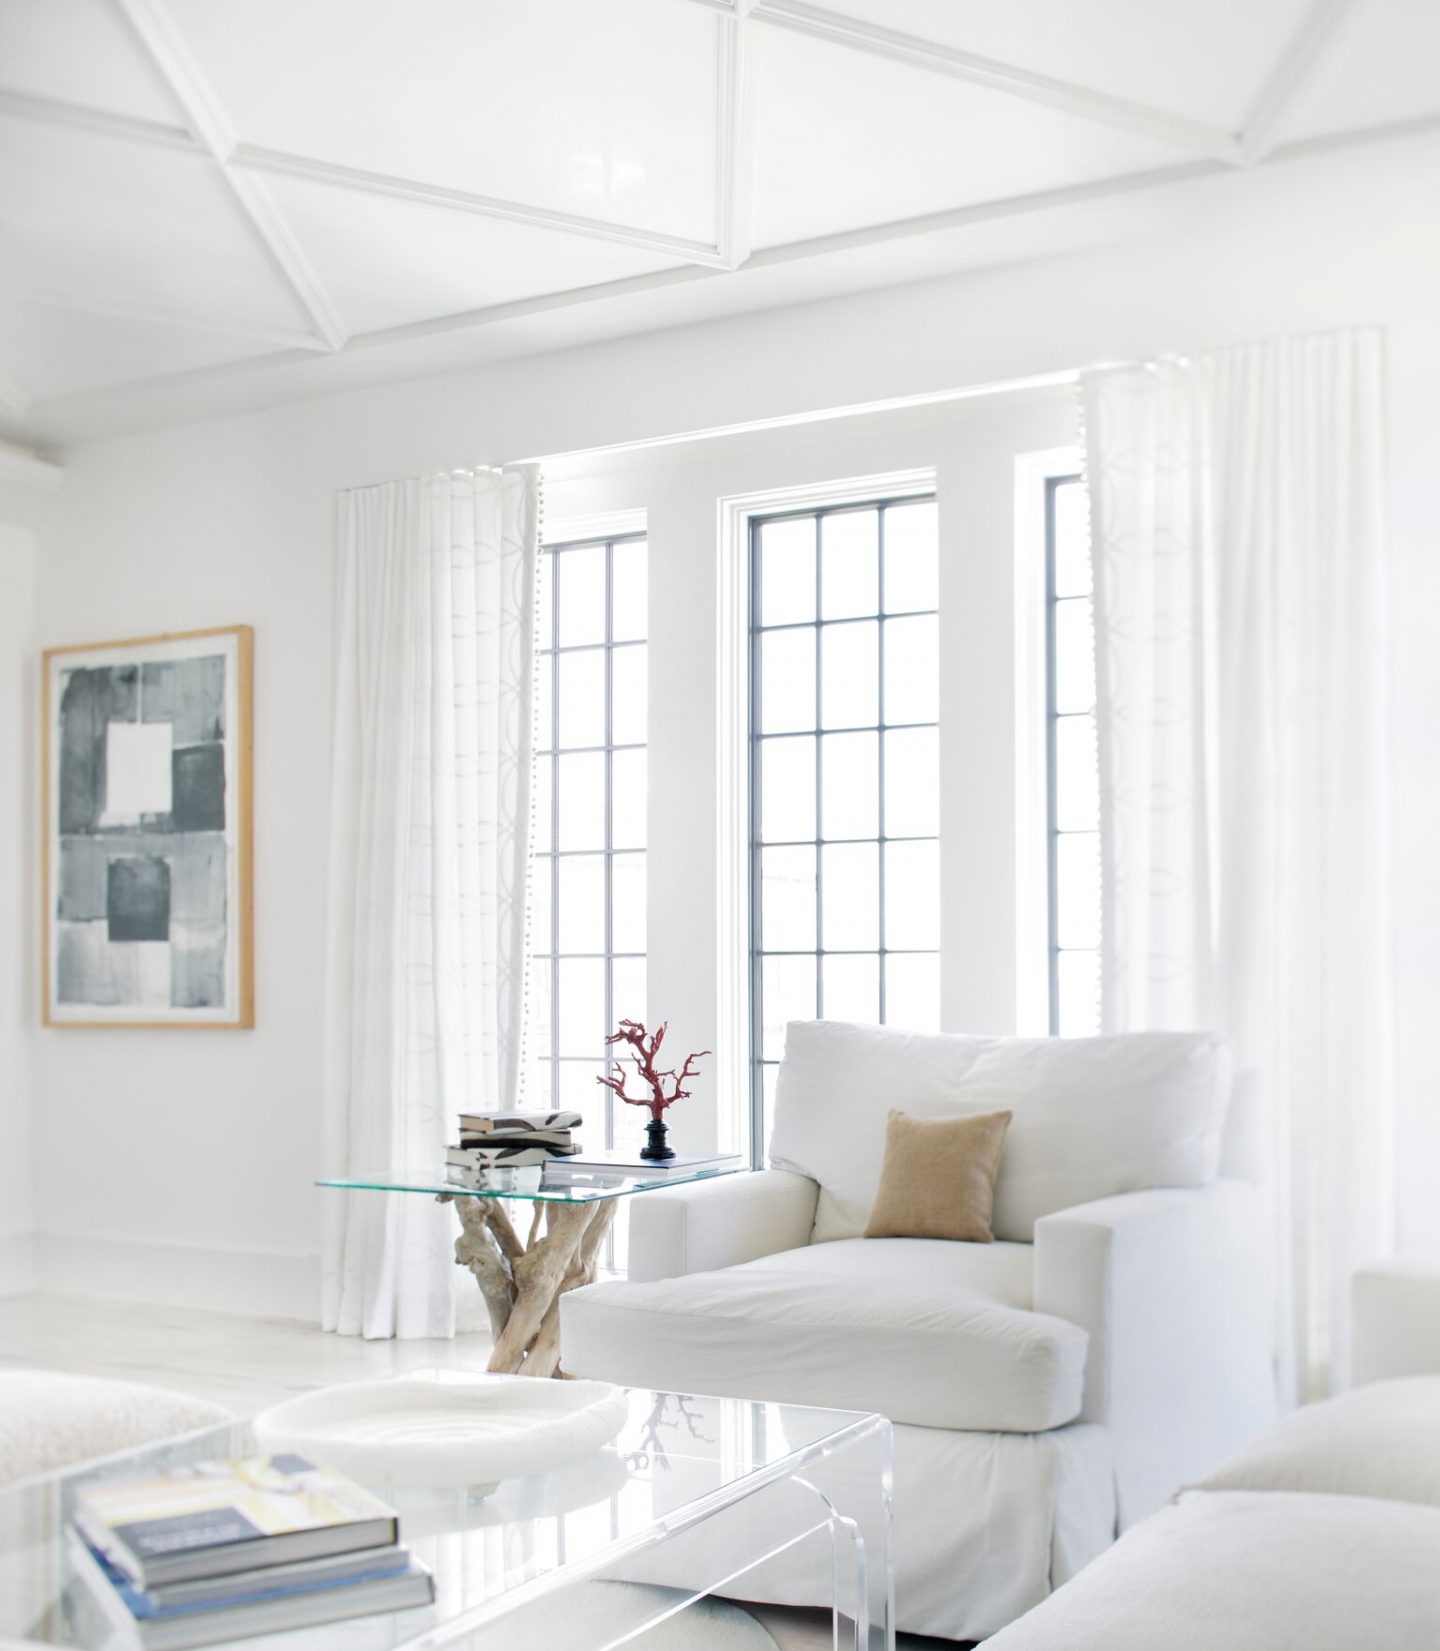 All white living room. Stunning interior design and Timeless Architecture Inspiration: Jeffrey Dungan. Photo: William Abranowicz. #classicdesign #traditional #architecture #jeffreydungan #sophisticateddesign #architect